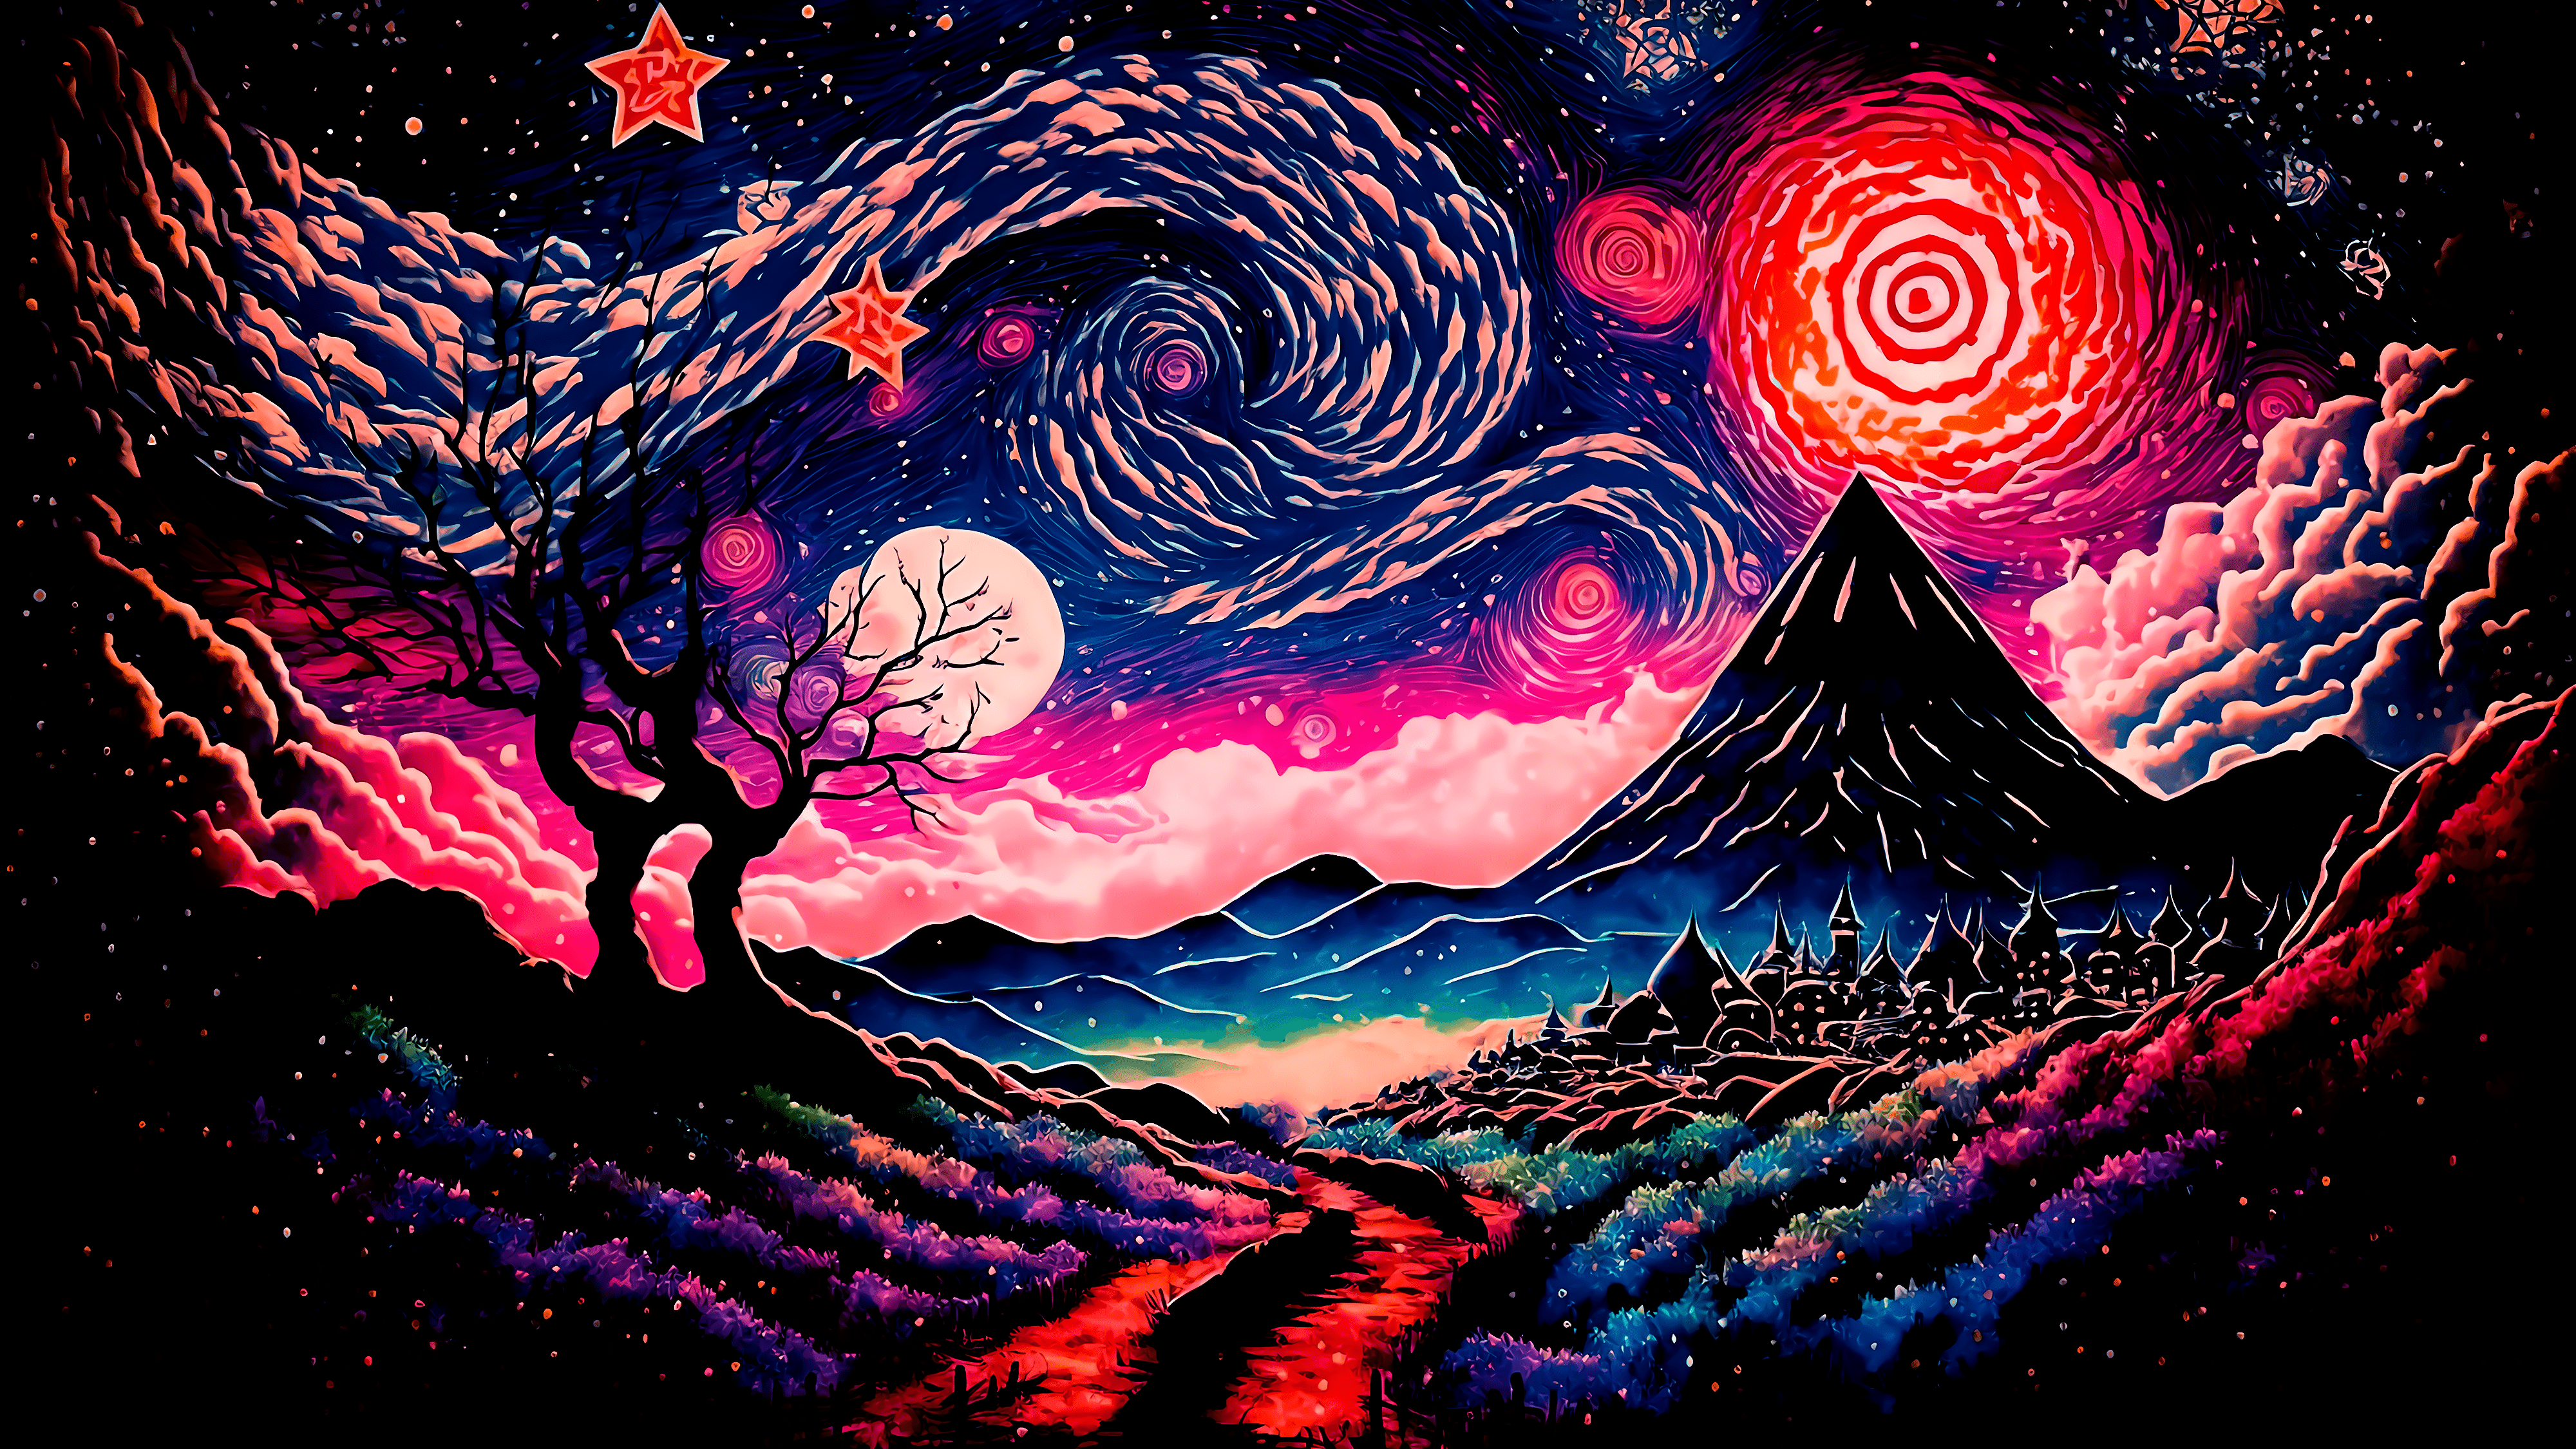 A psychedelic painting of a tree, mountain, and sky - Landscape